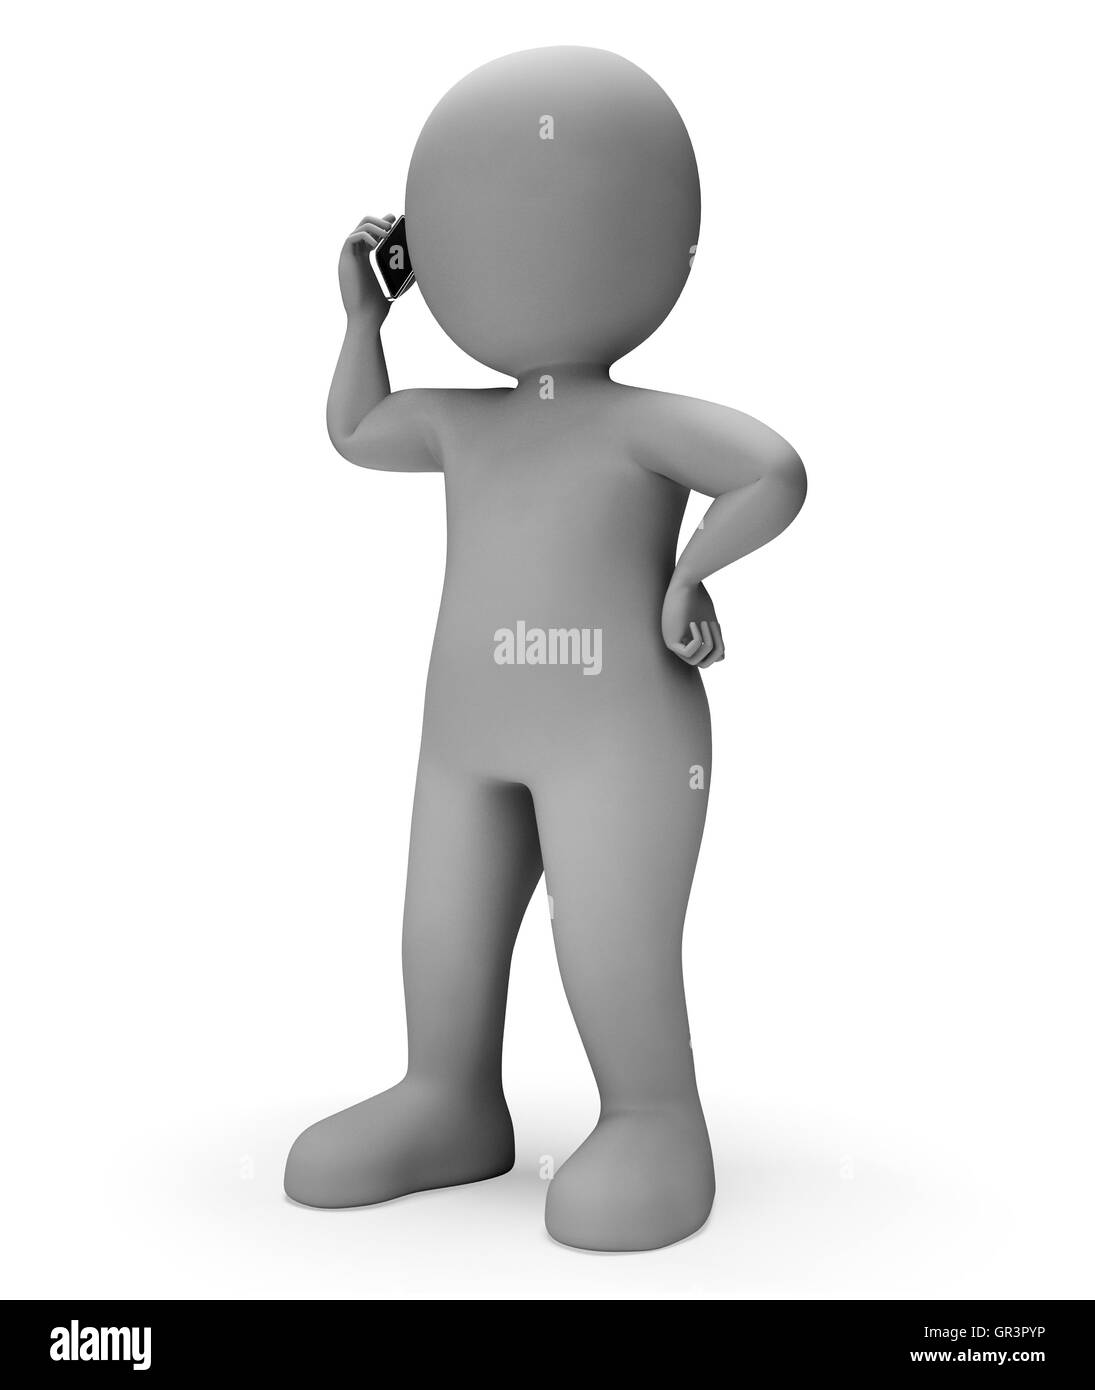 Character Calling Meaning Correspond Chat And Talked 3d Rendering Stock Photo